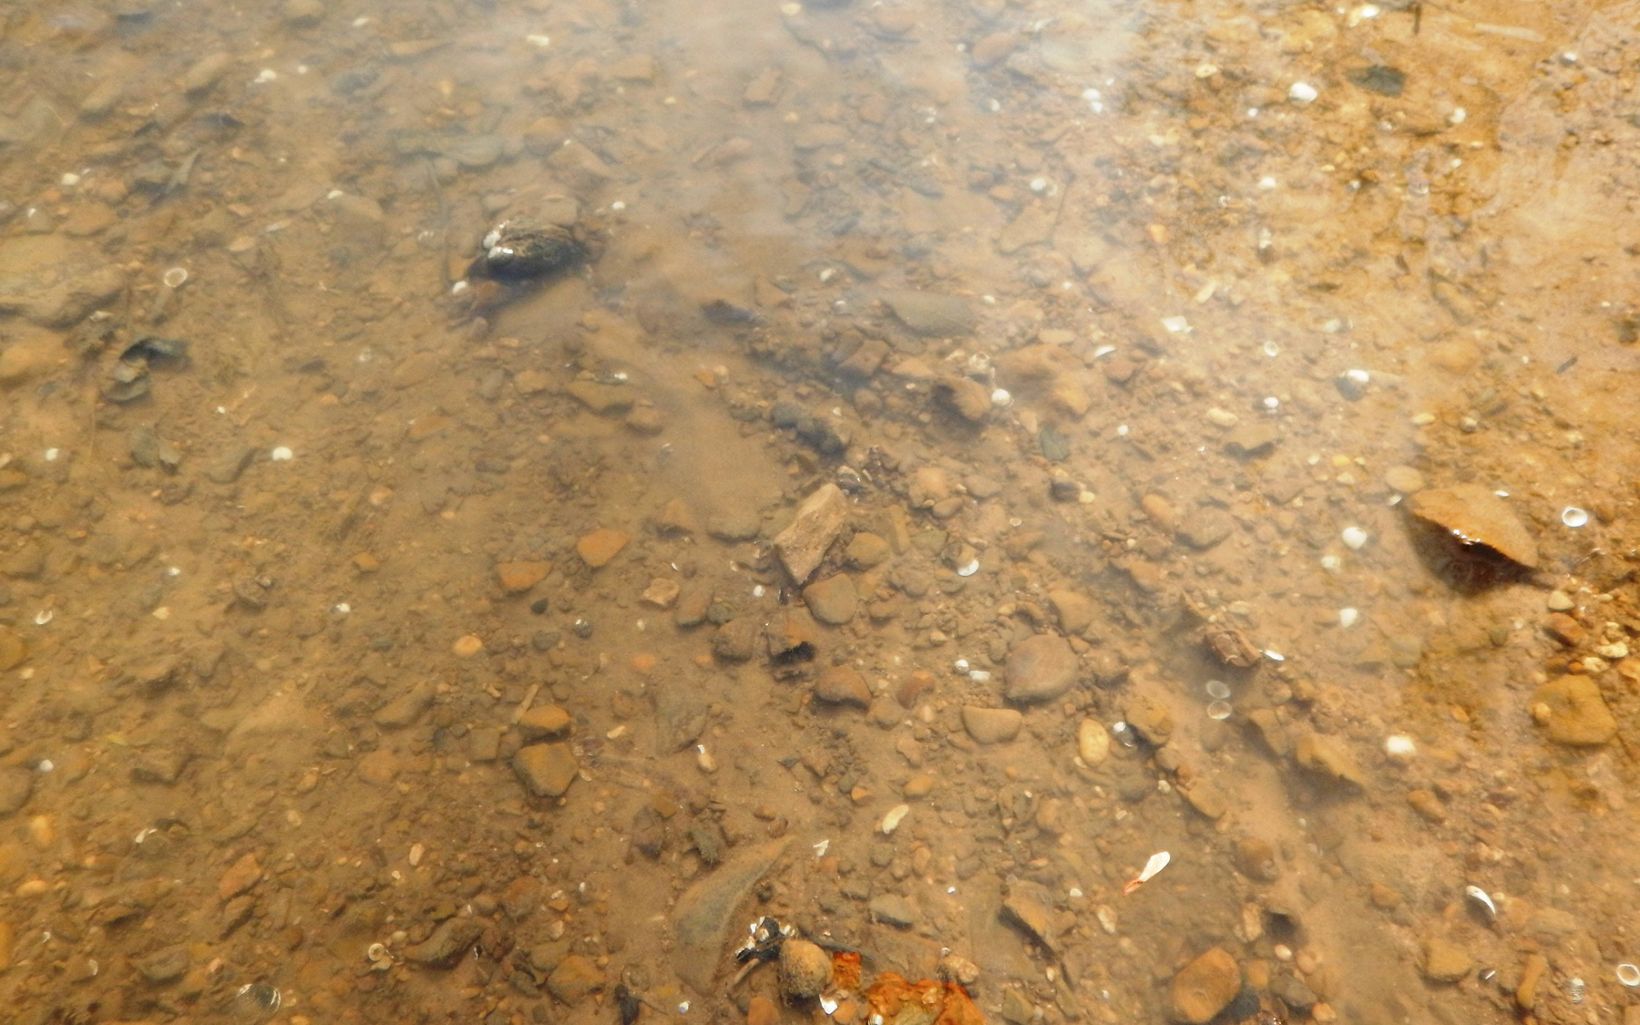 An underwater trail forged by a mussel can be seen from above.